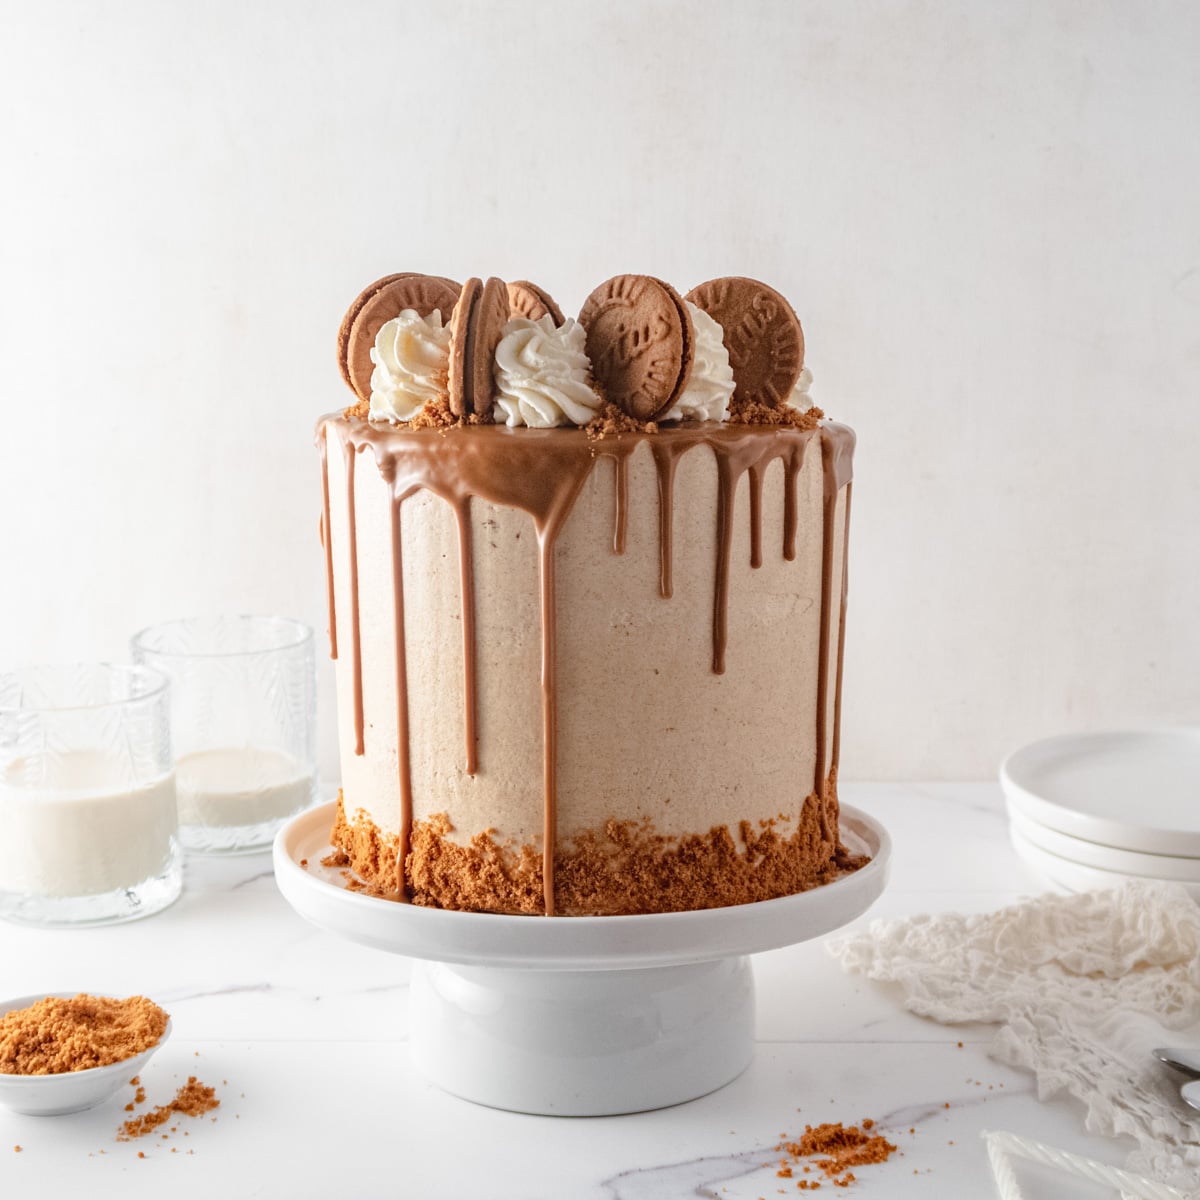 Vegan cake with a Biscoff drip and piped buttercream rosette and cookies on a cake stand in front of a white background with plates, glasses and cookies crumbles around.